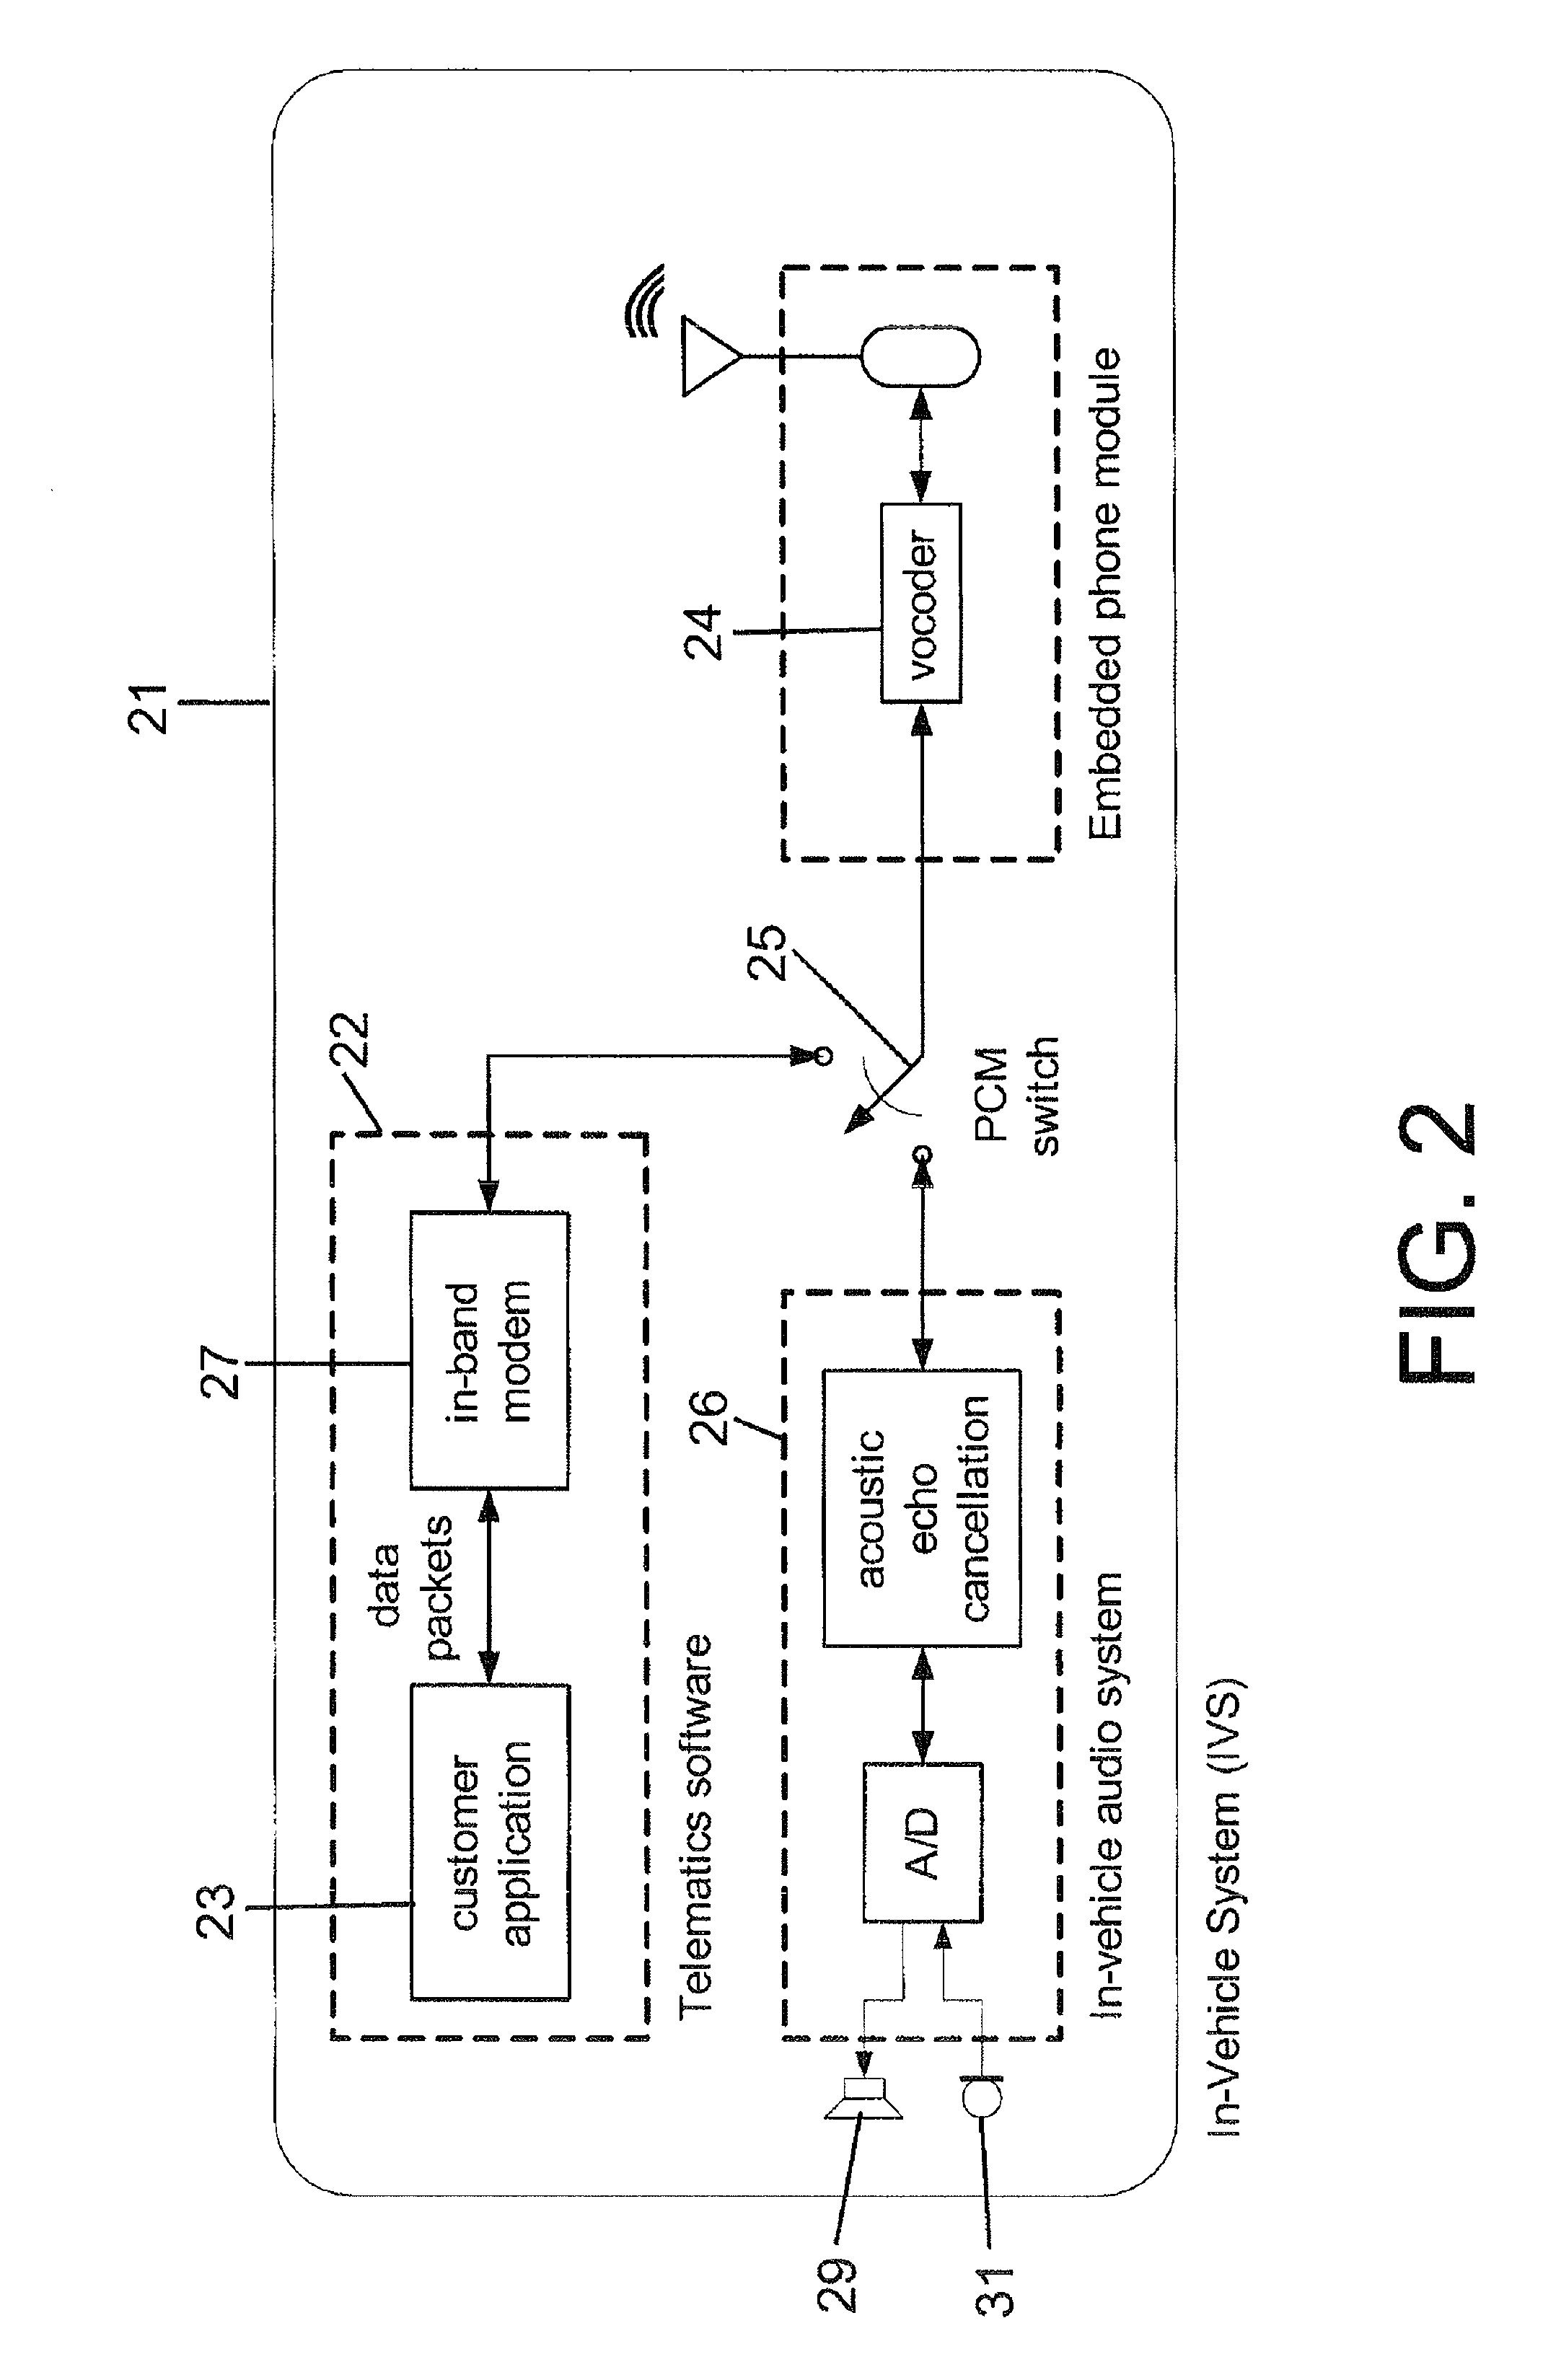 Wireless in-band signaling with in-vehicle systems